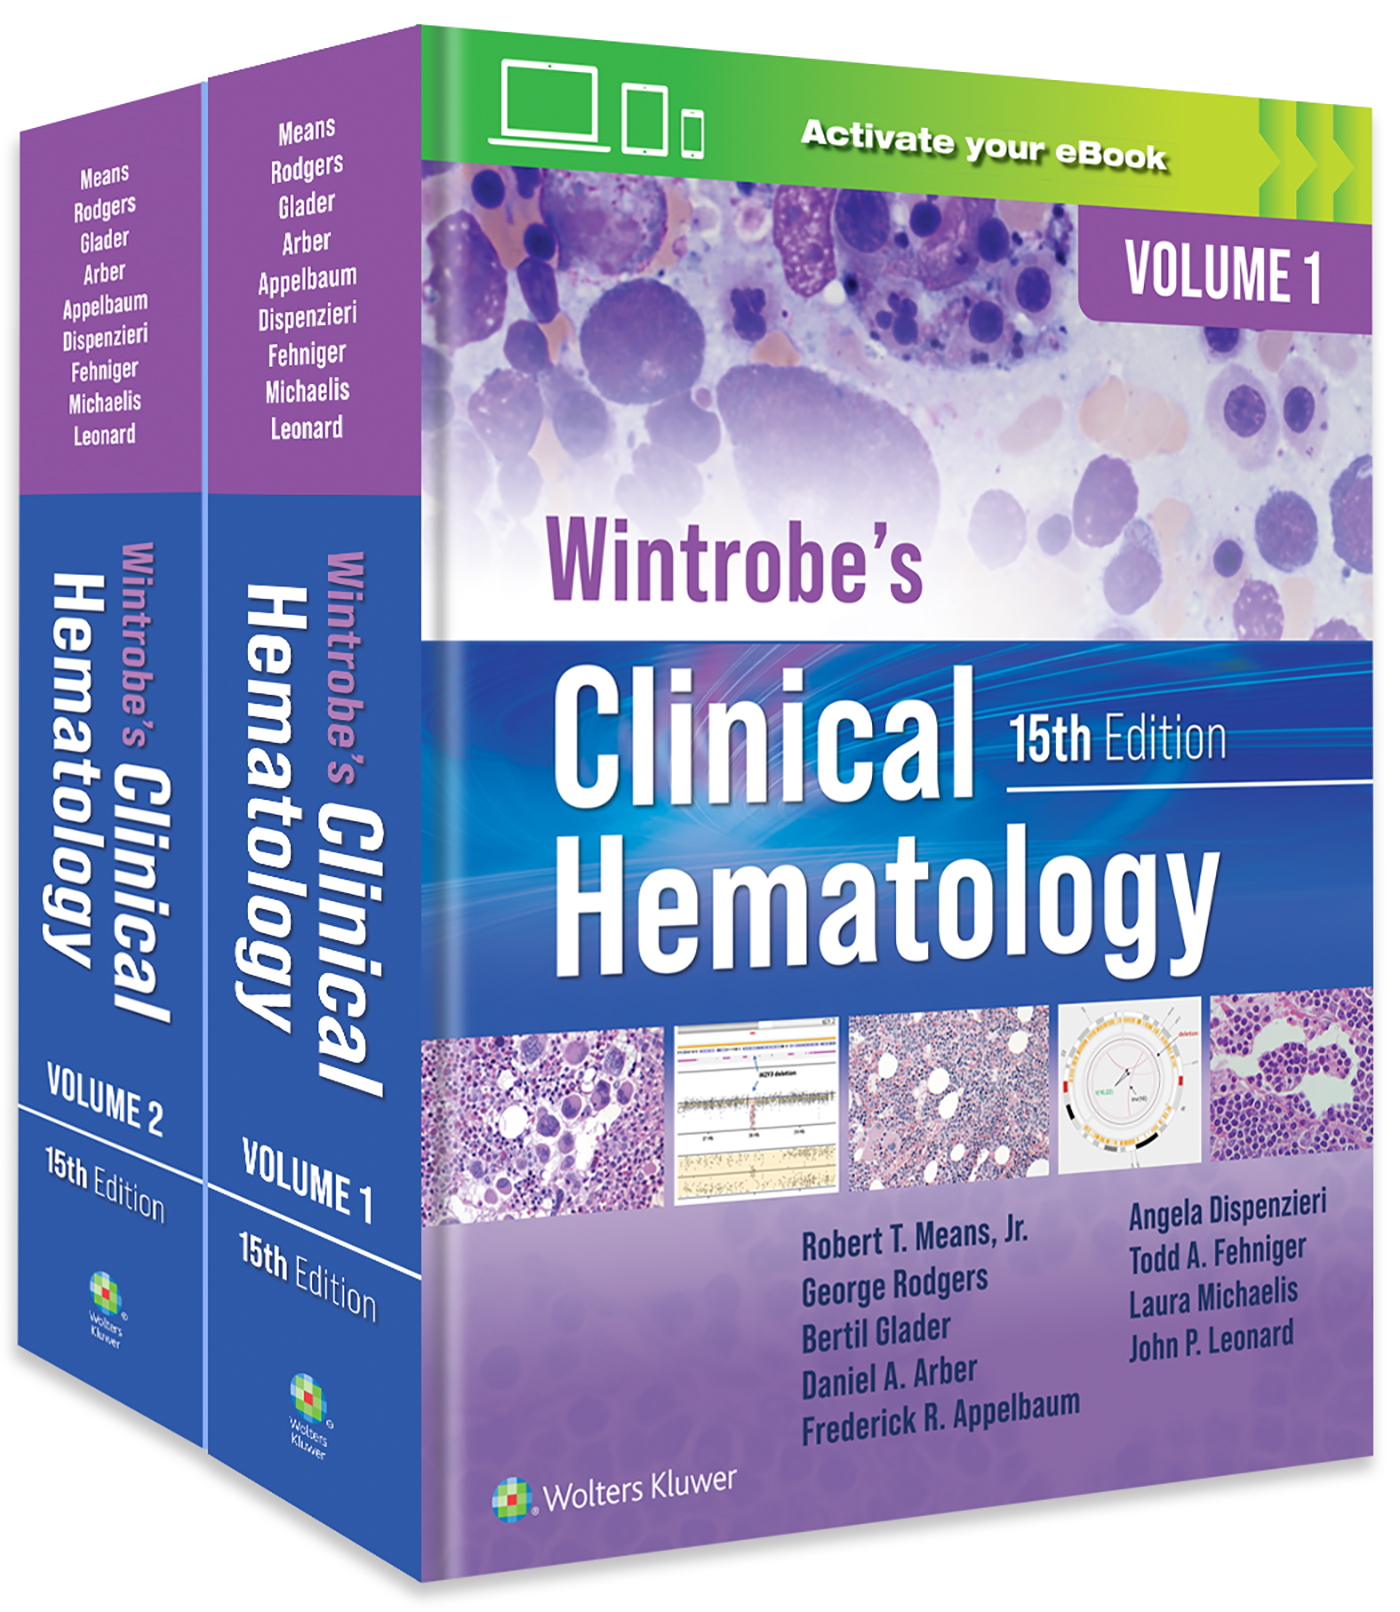 Wintrobe's Clinical Hematology, 15th ed., in 2 vols.